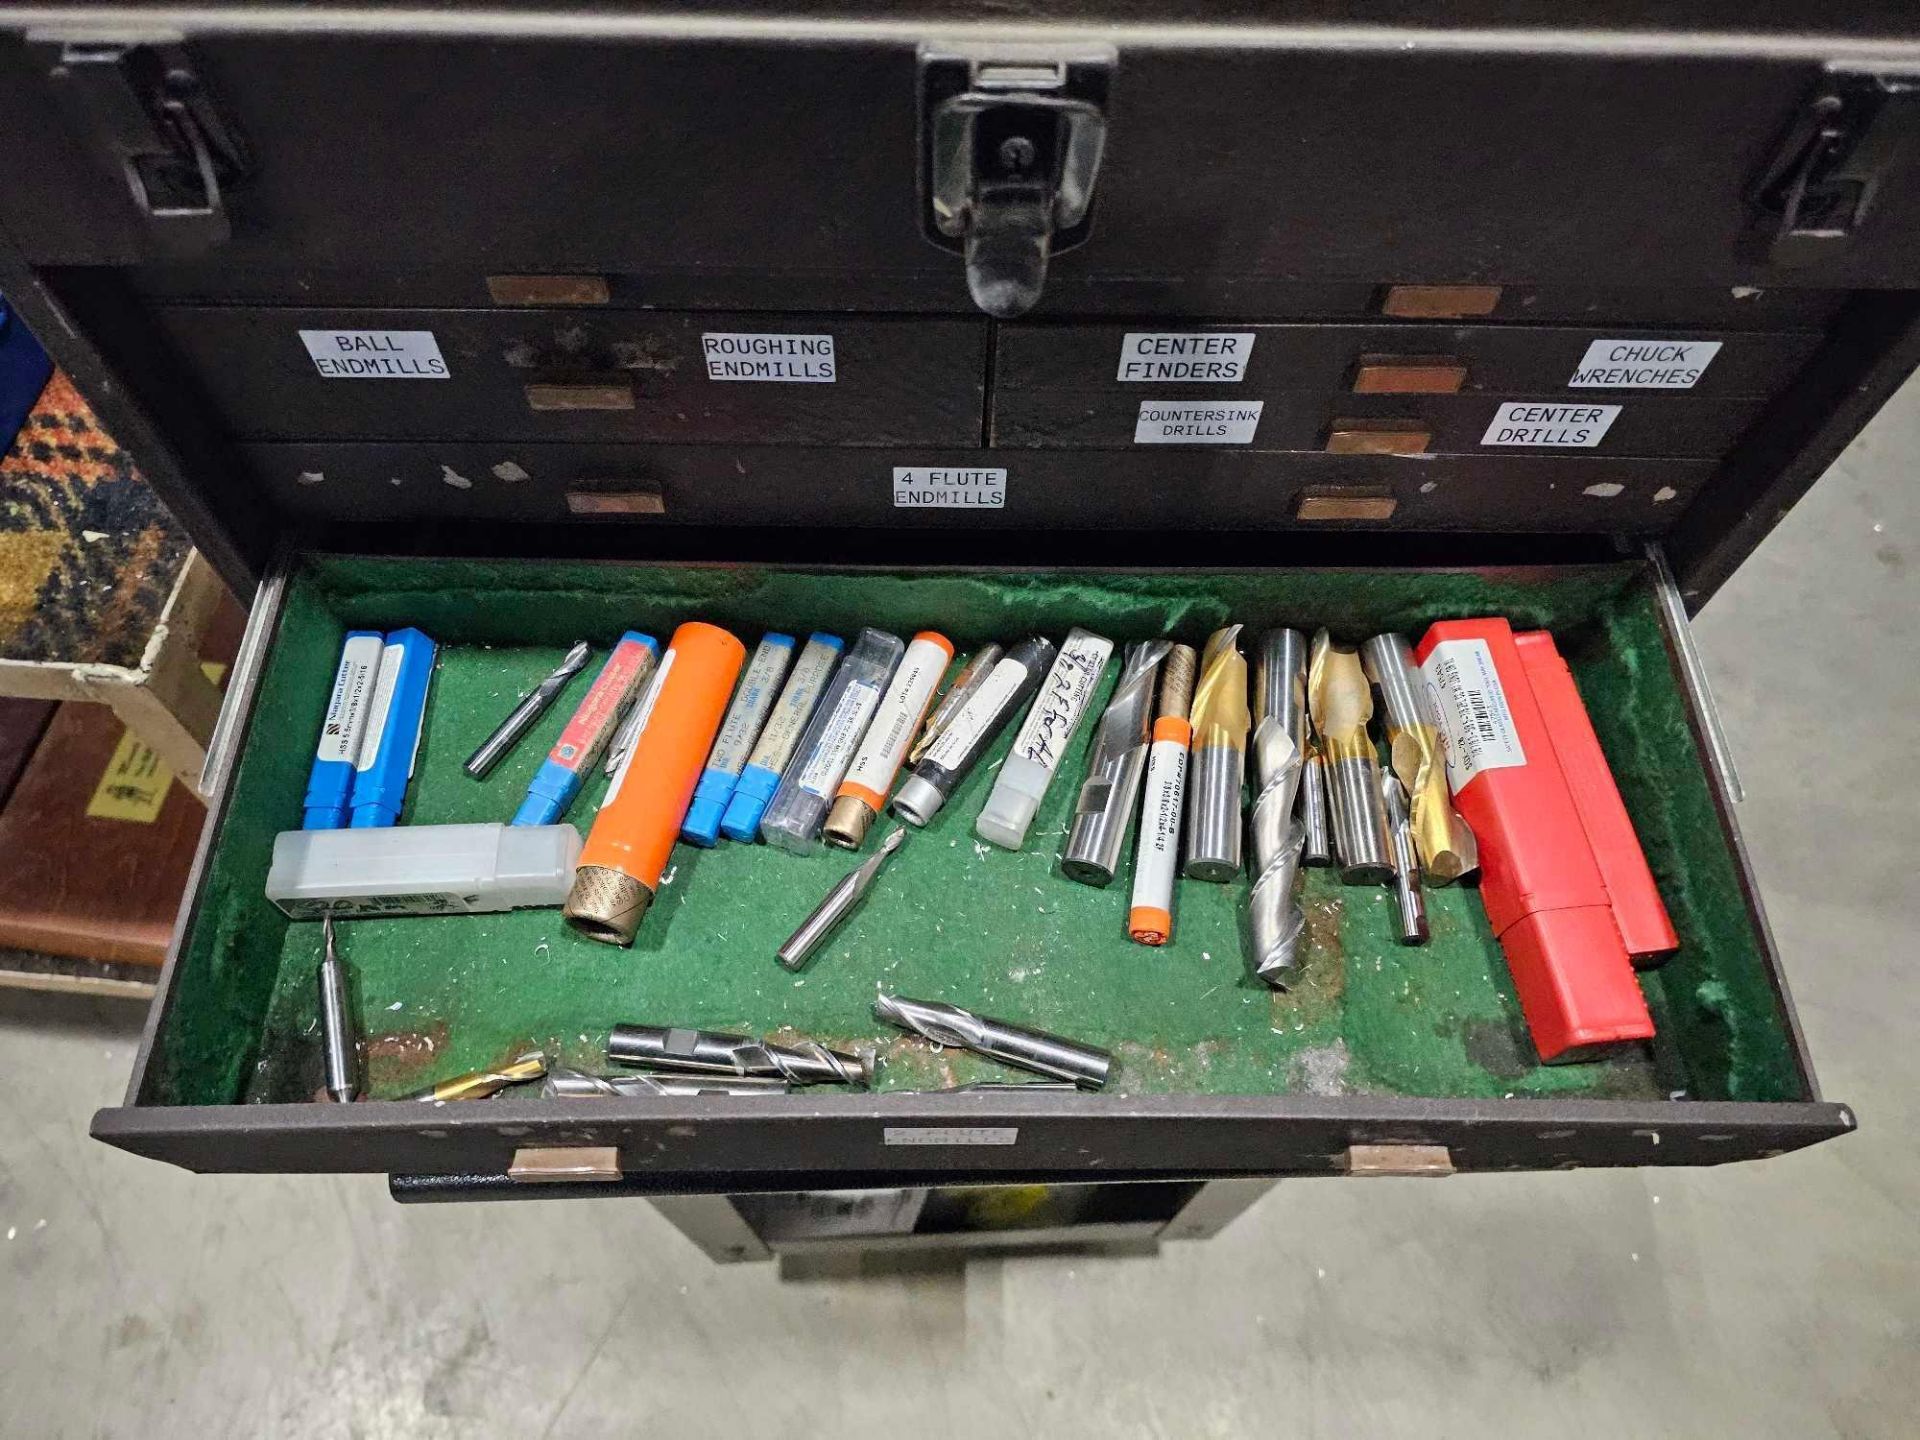 KENNEDY TOOL BOXES LOADED WITH MACHINISTS TOOLS AND MEASURING DEVICES - Image 35 of 45